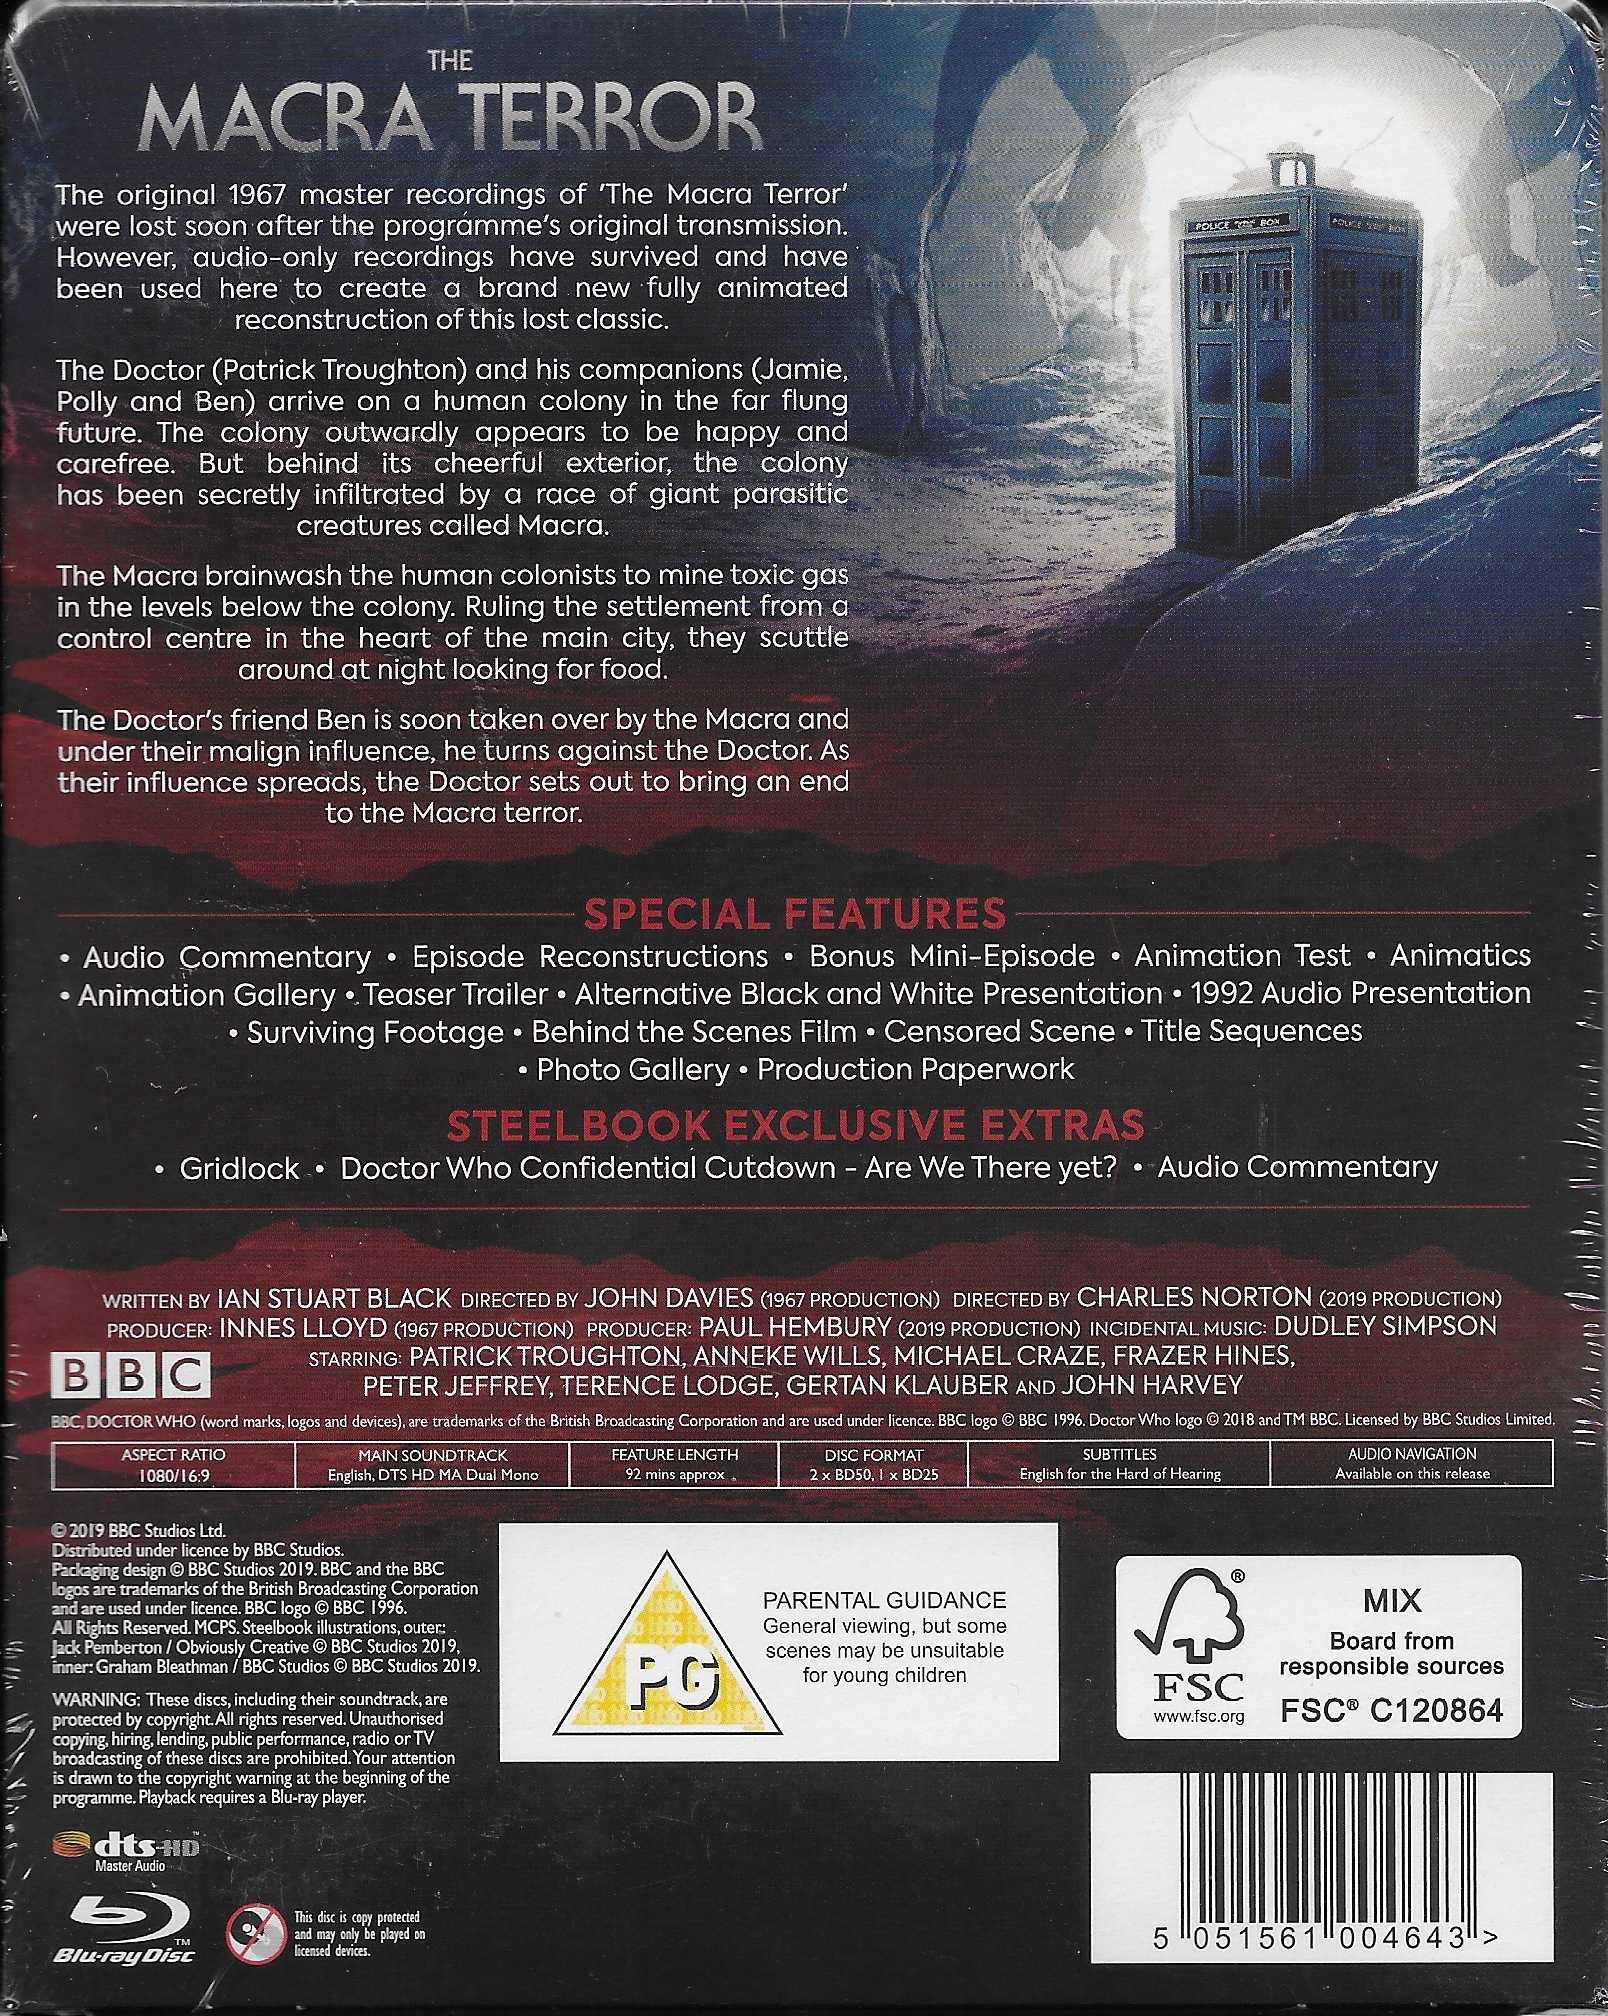 Picture of BBCBD 0464 Doctor Who - The Macra terror by artist Ian Stuart Black from the BBC records and Tapes library